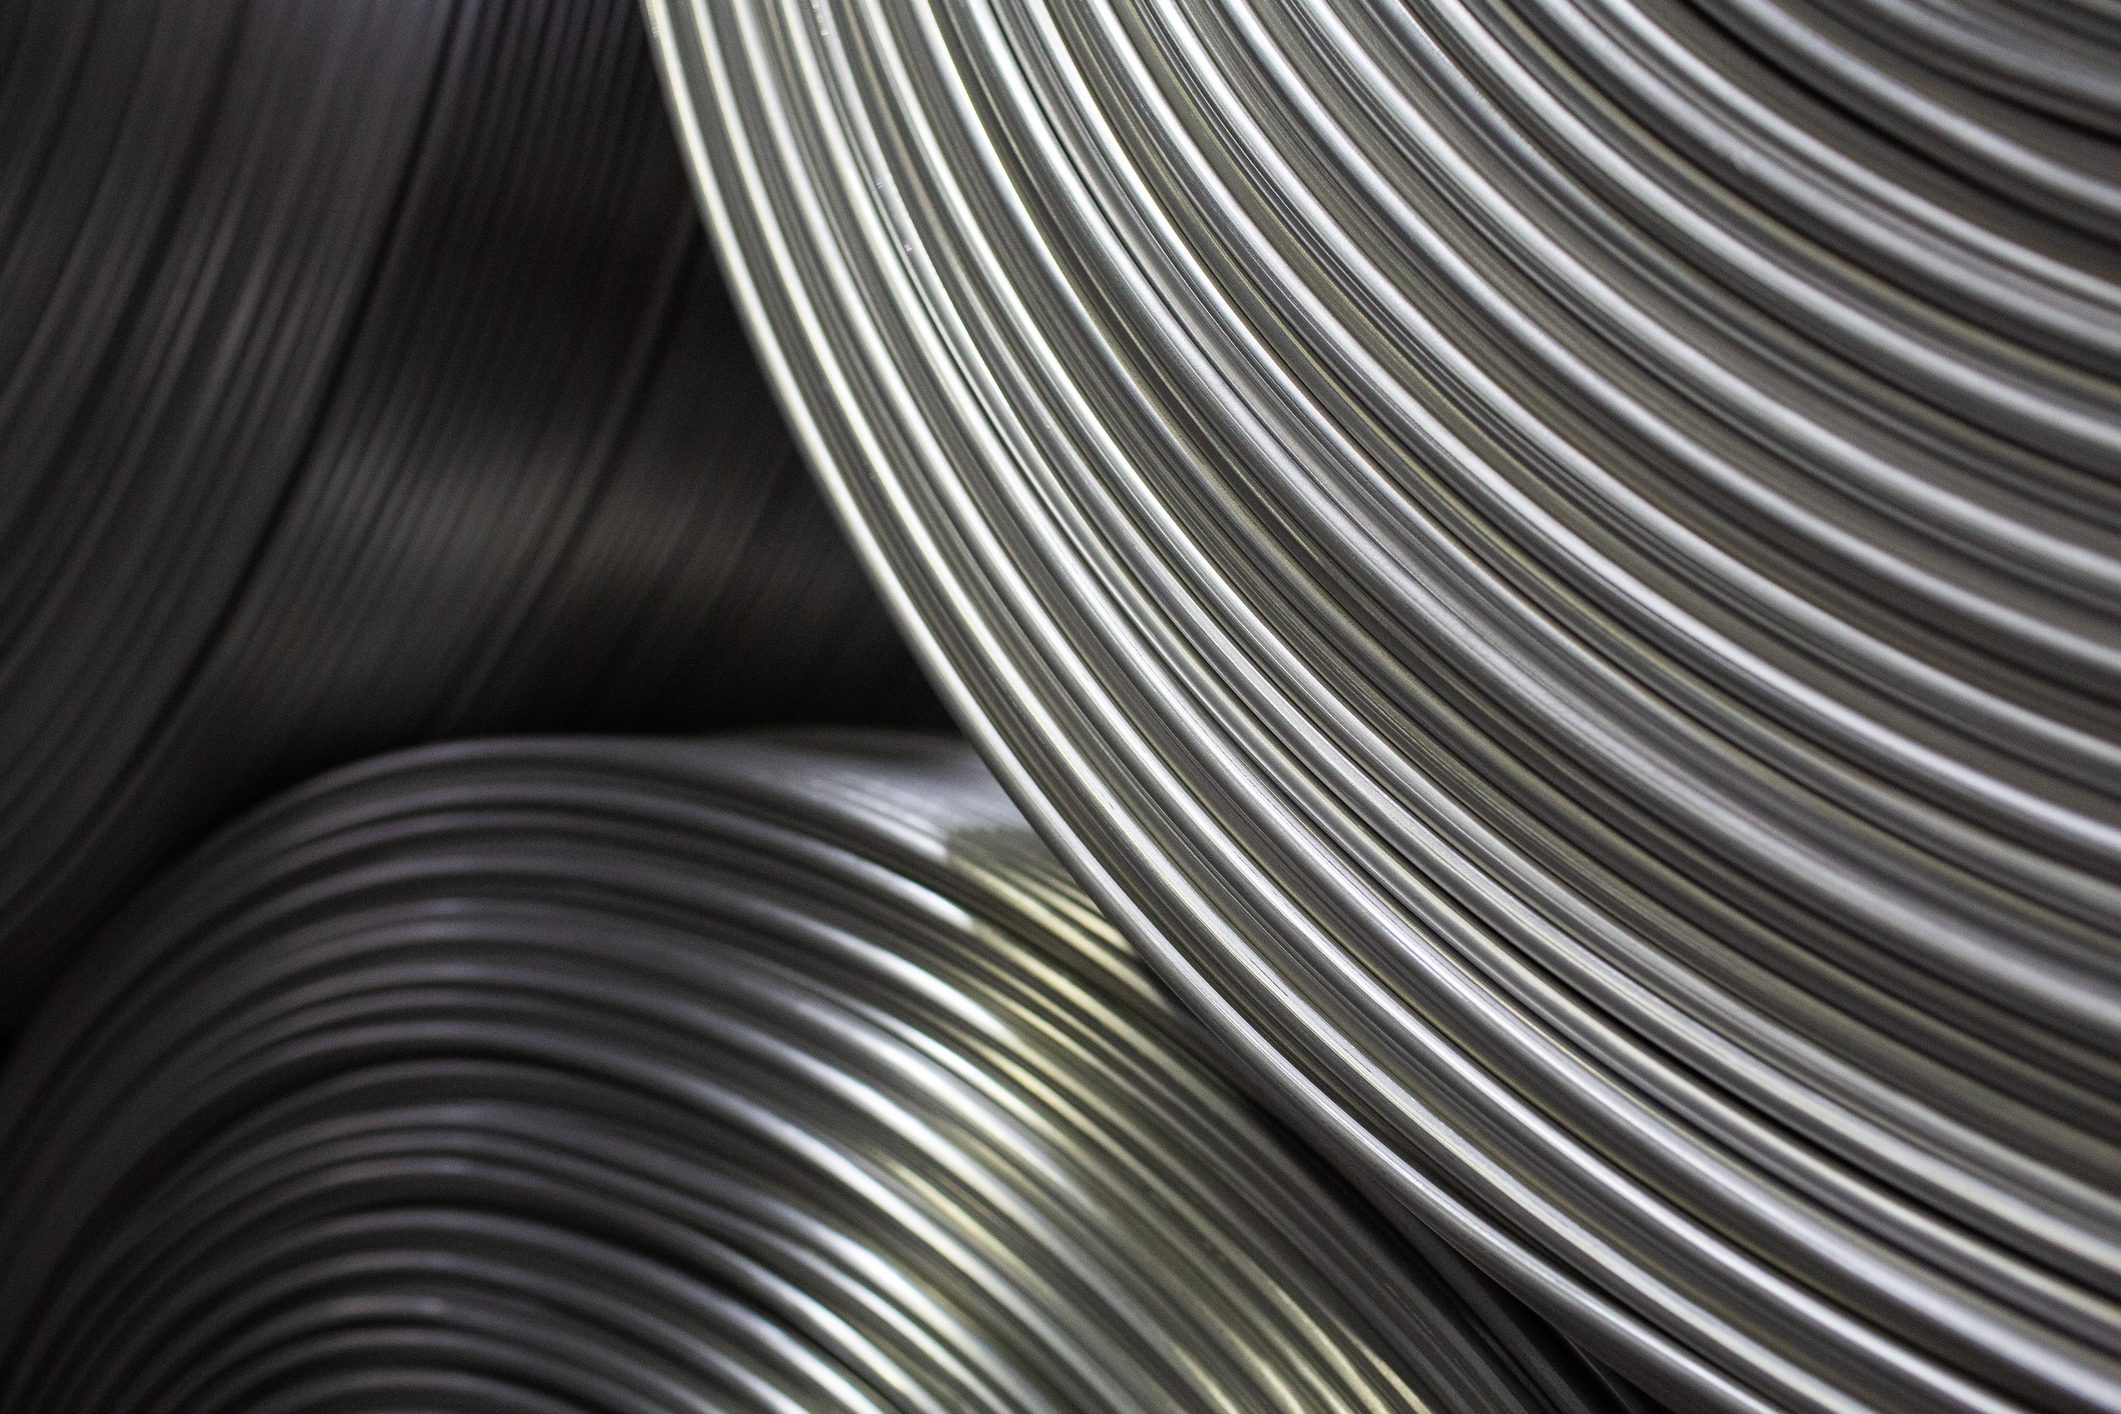 Coils of aluminium wire at a steel plant